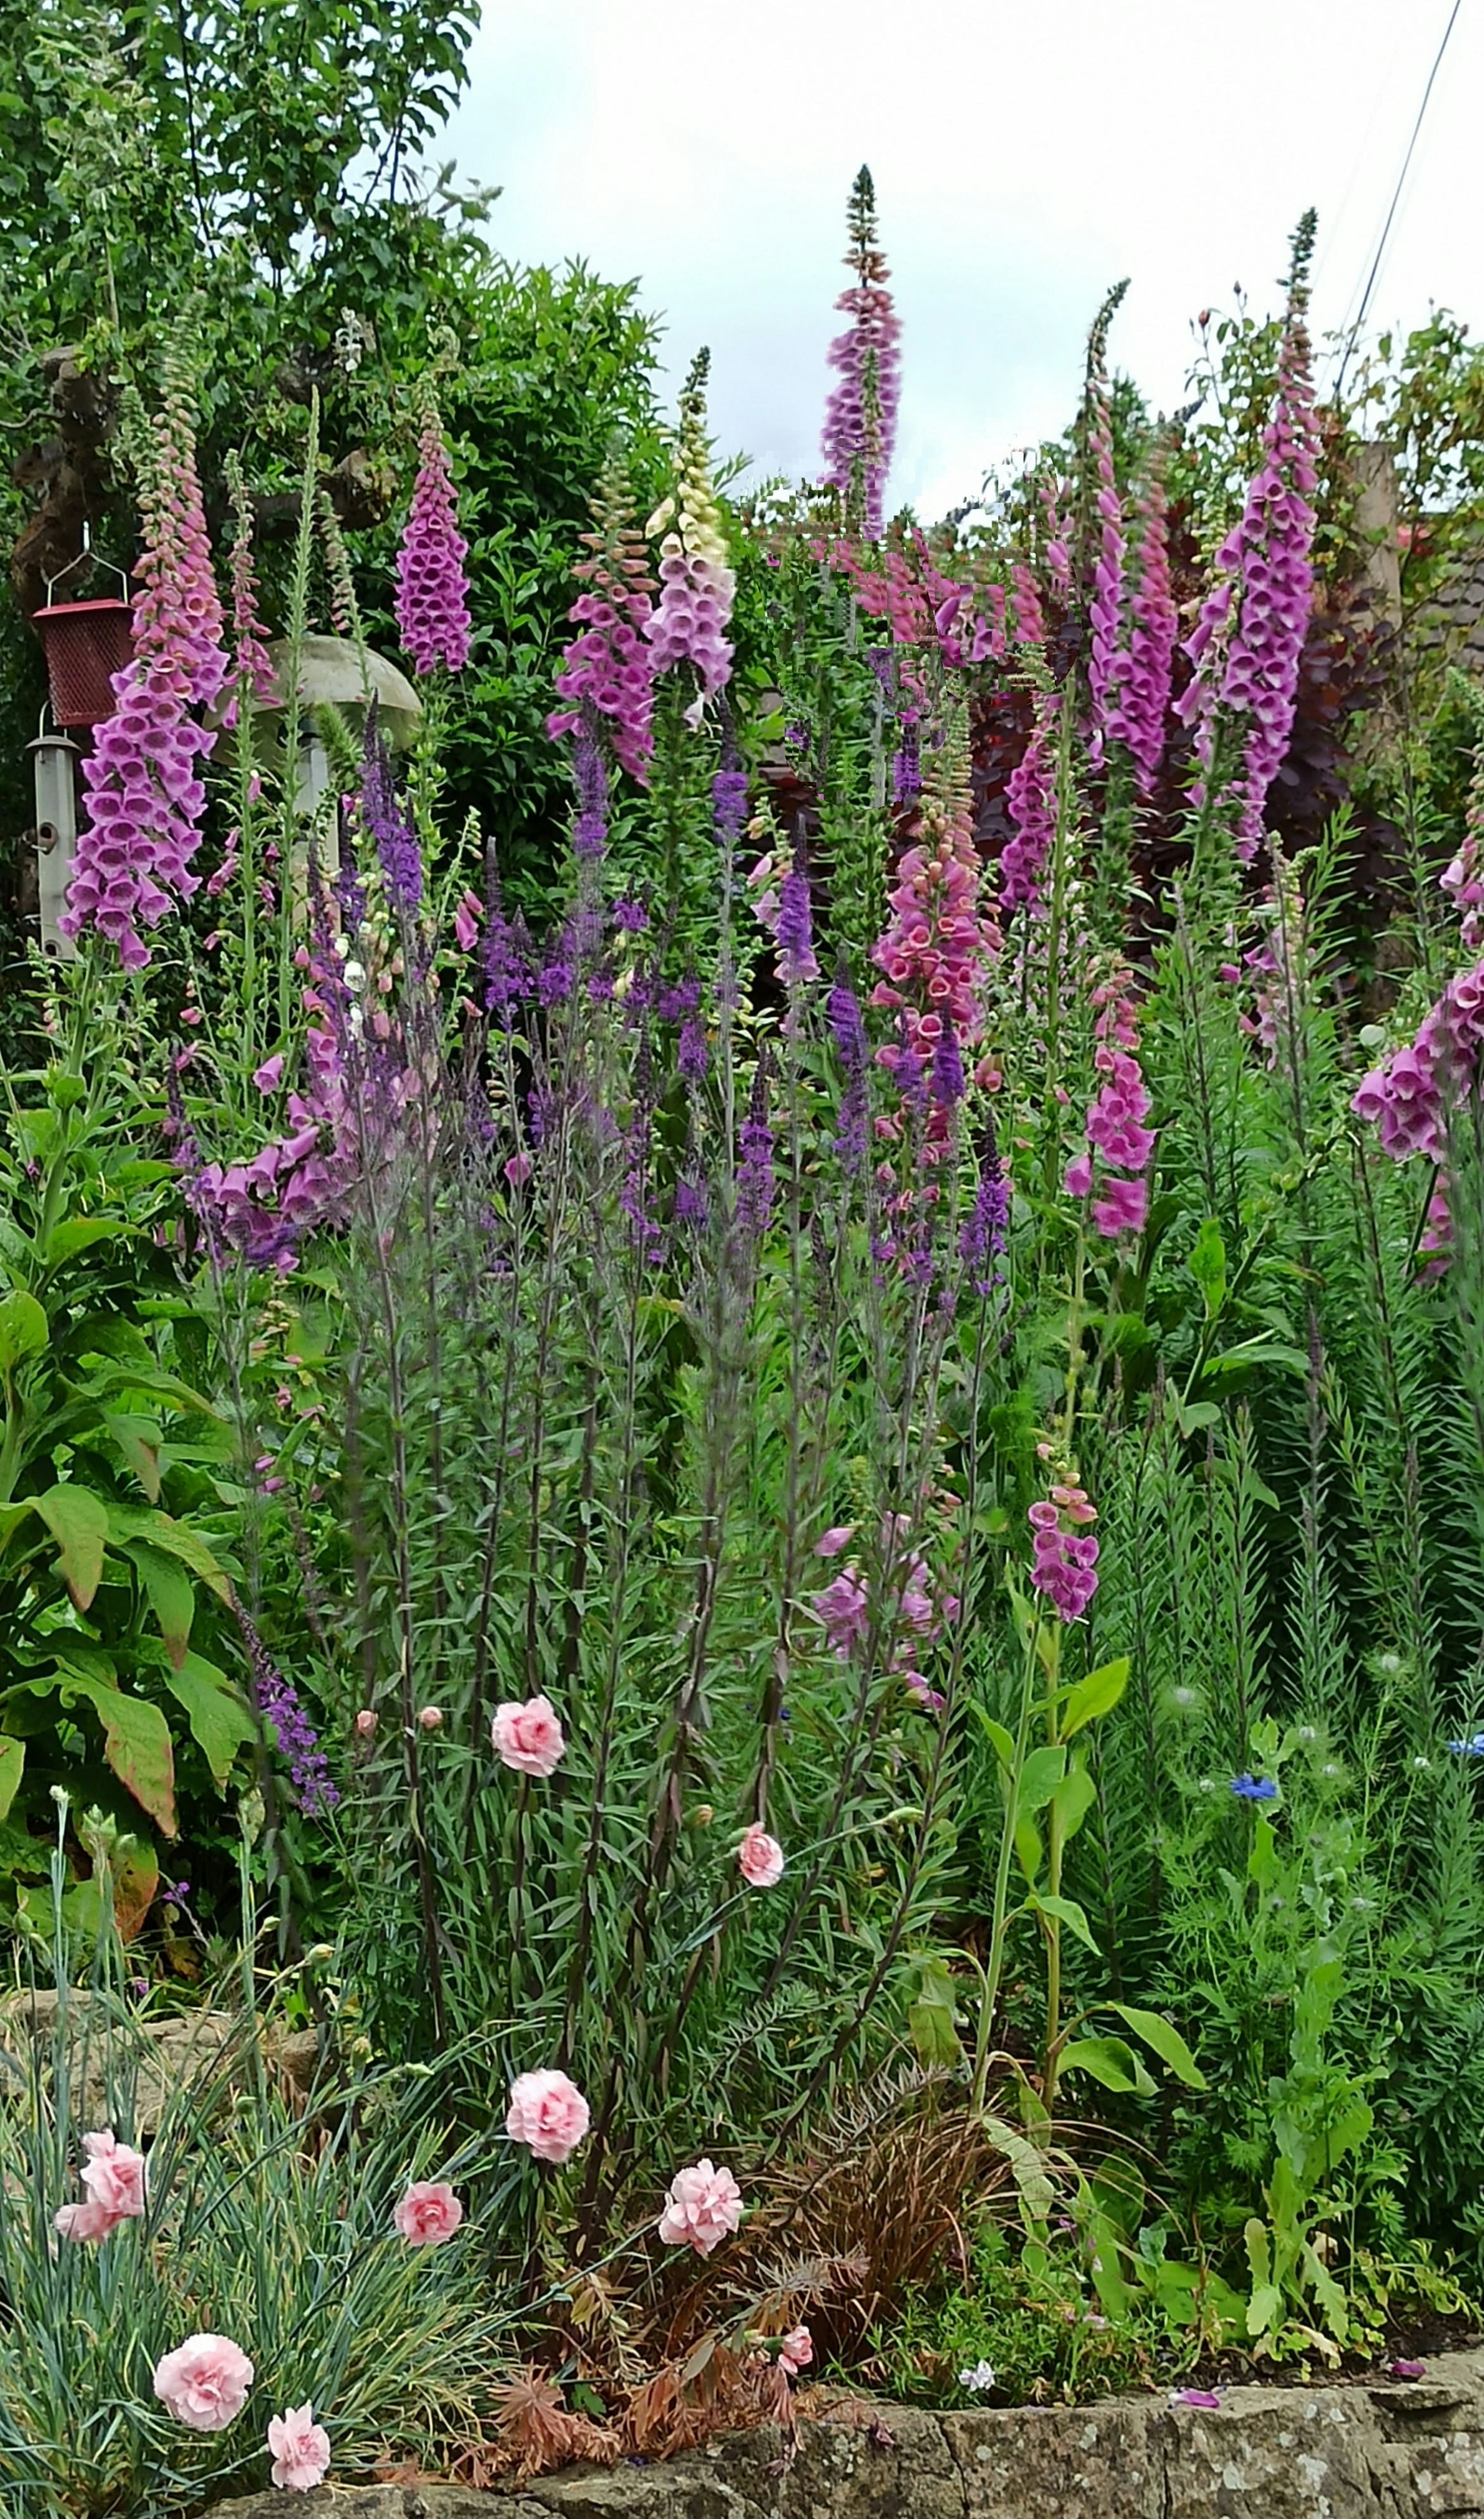 foxgloves and toadflax in a flower bed